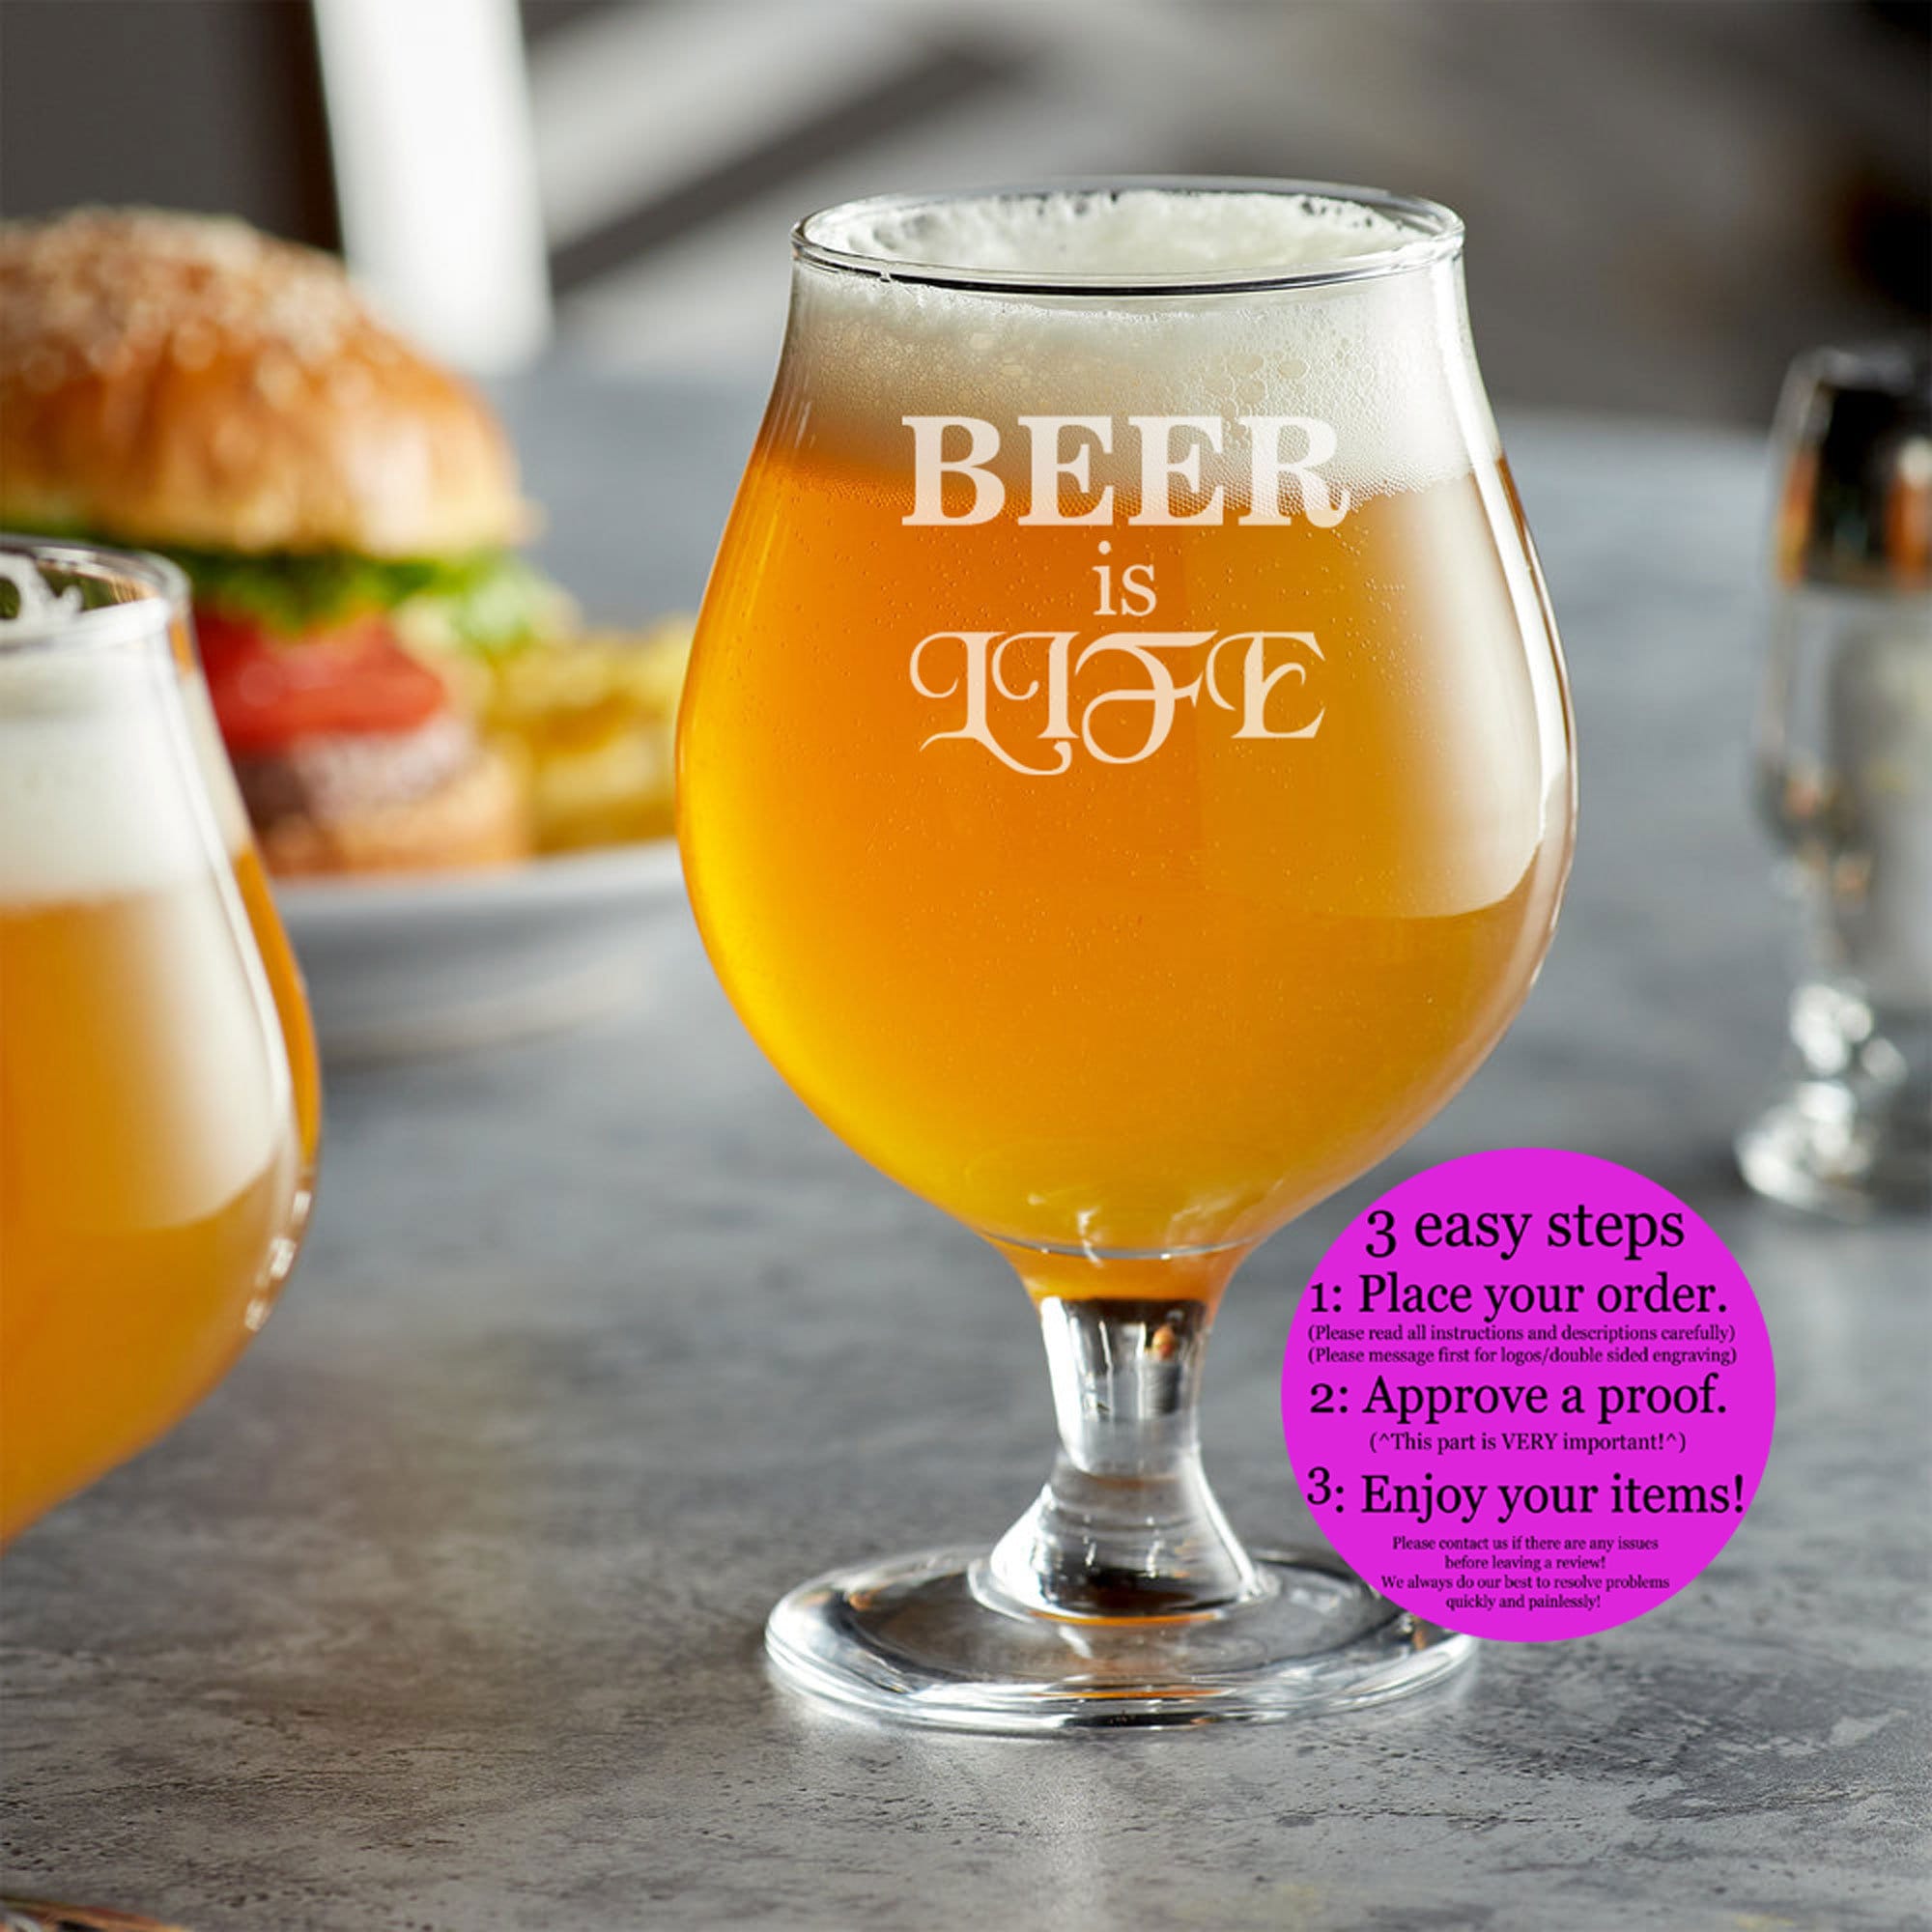 2 Easy Steps to Great Beer Glassware